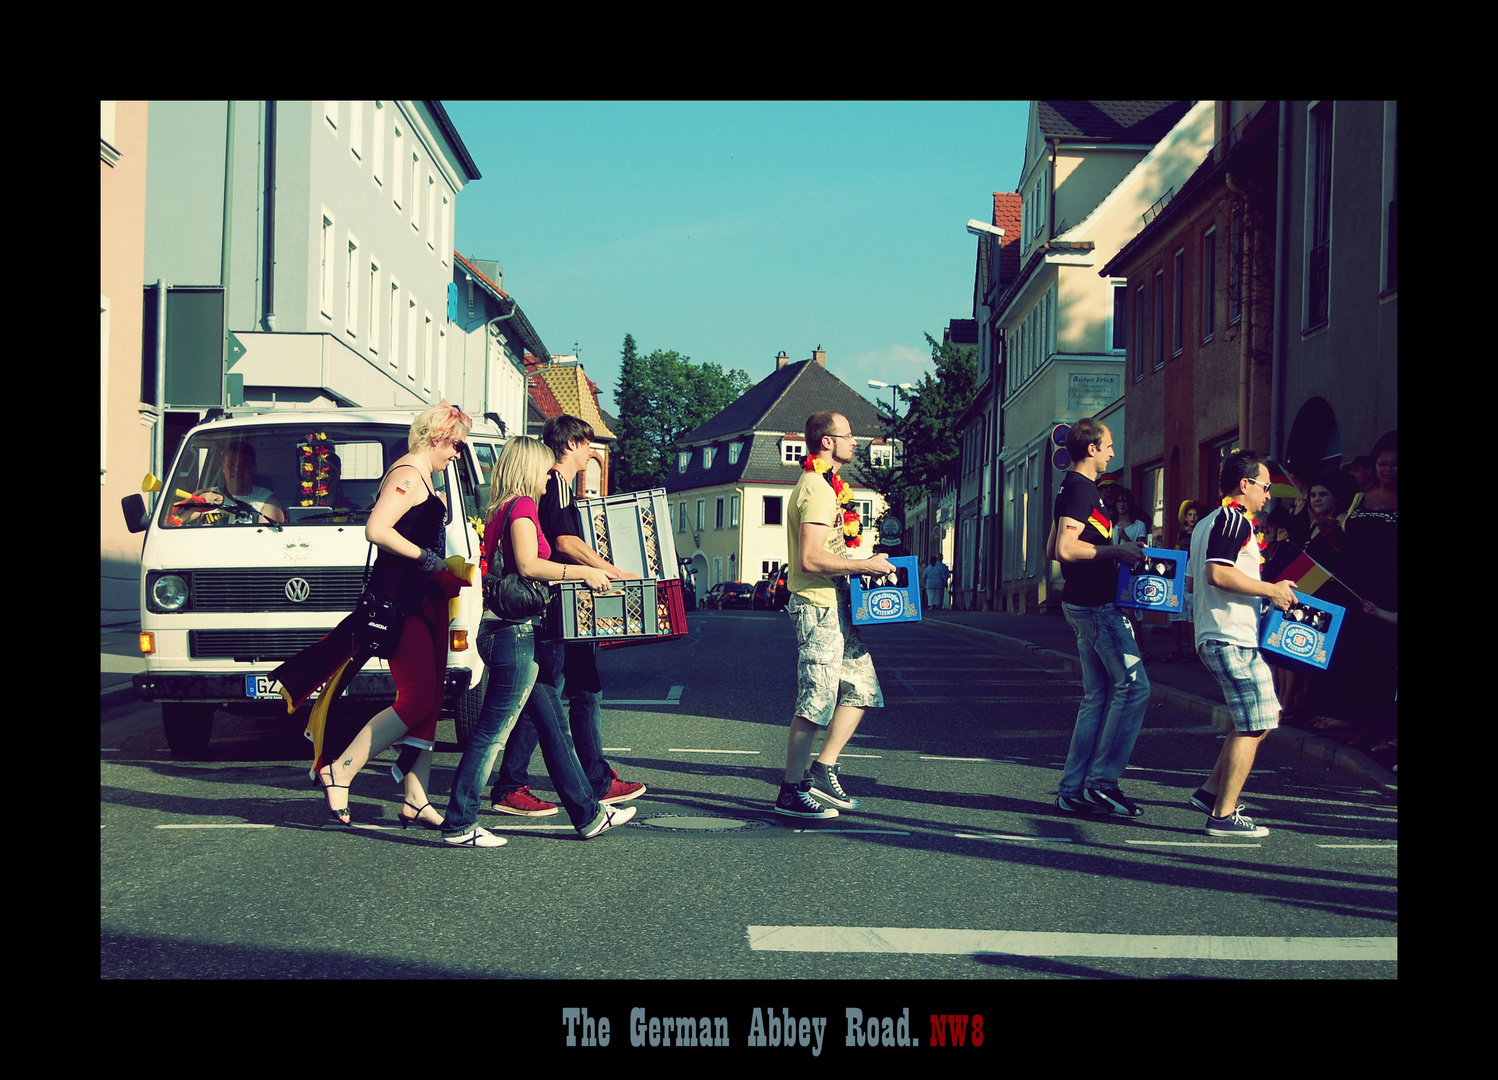 The German Abbey Road